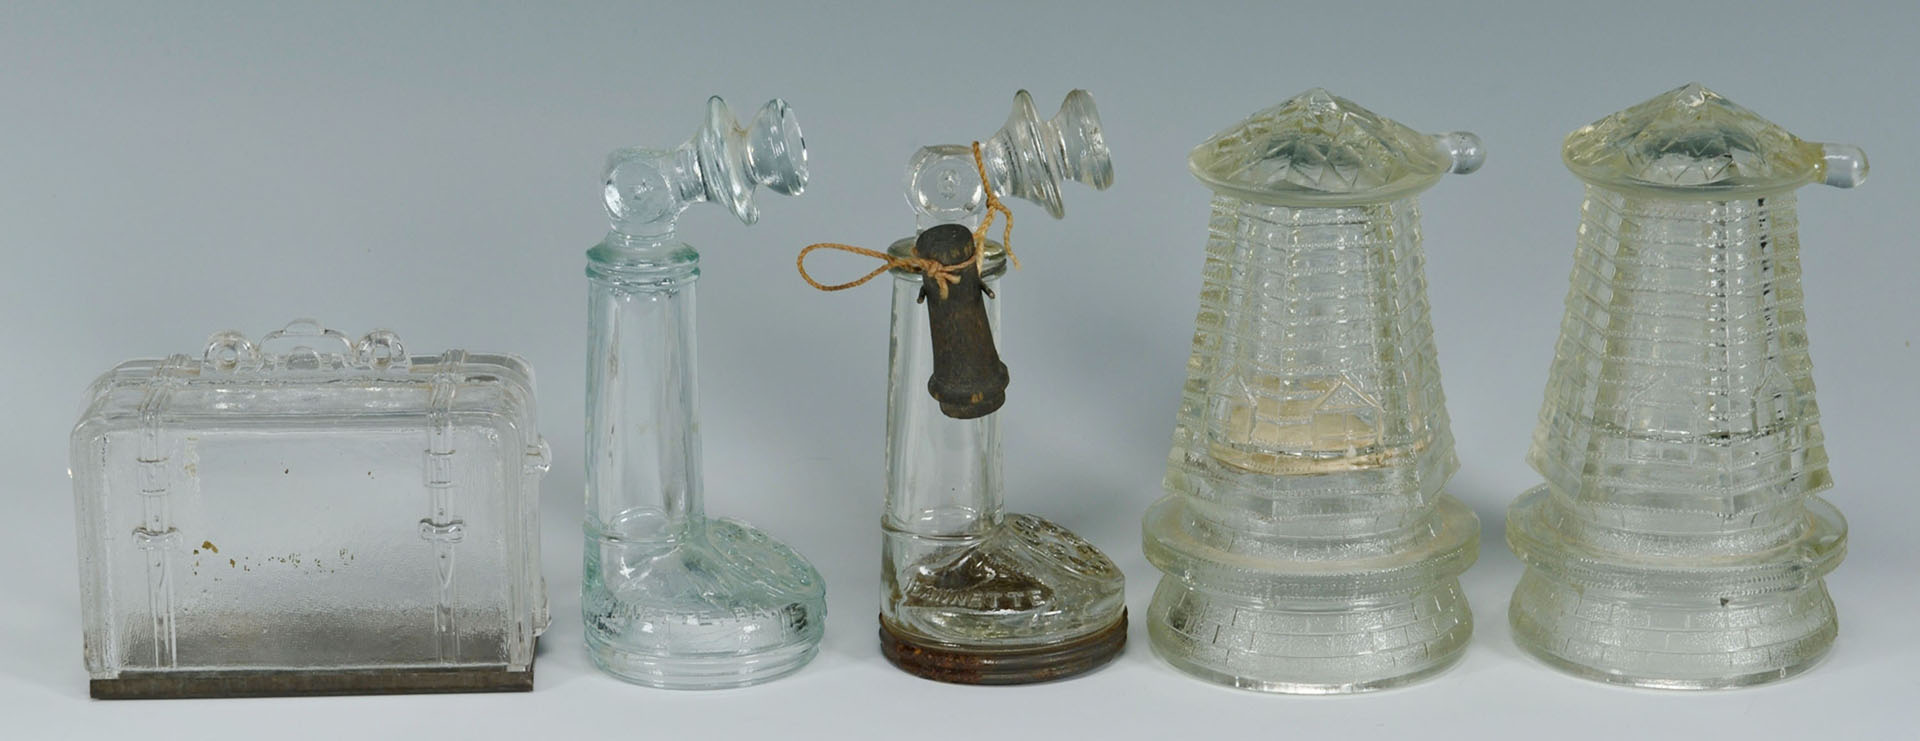 Lot 665: 12 American Glass Candy Containers